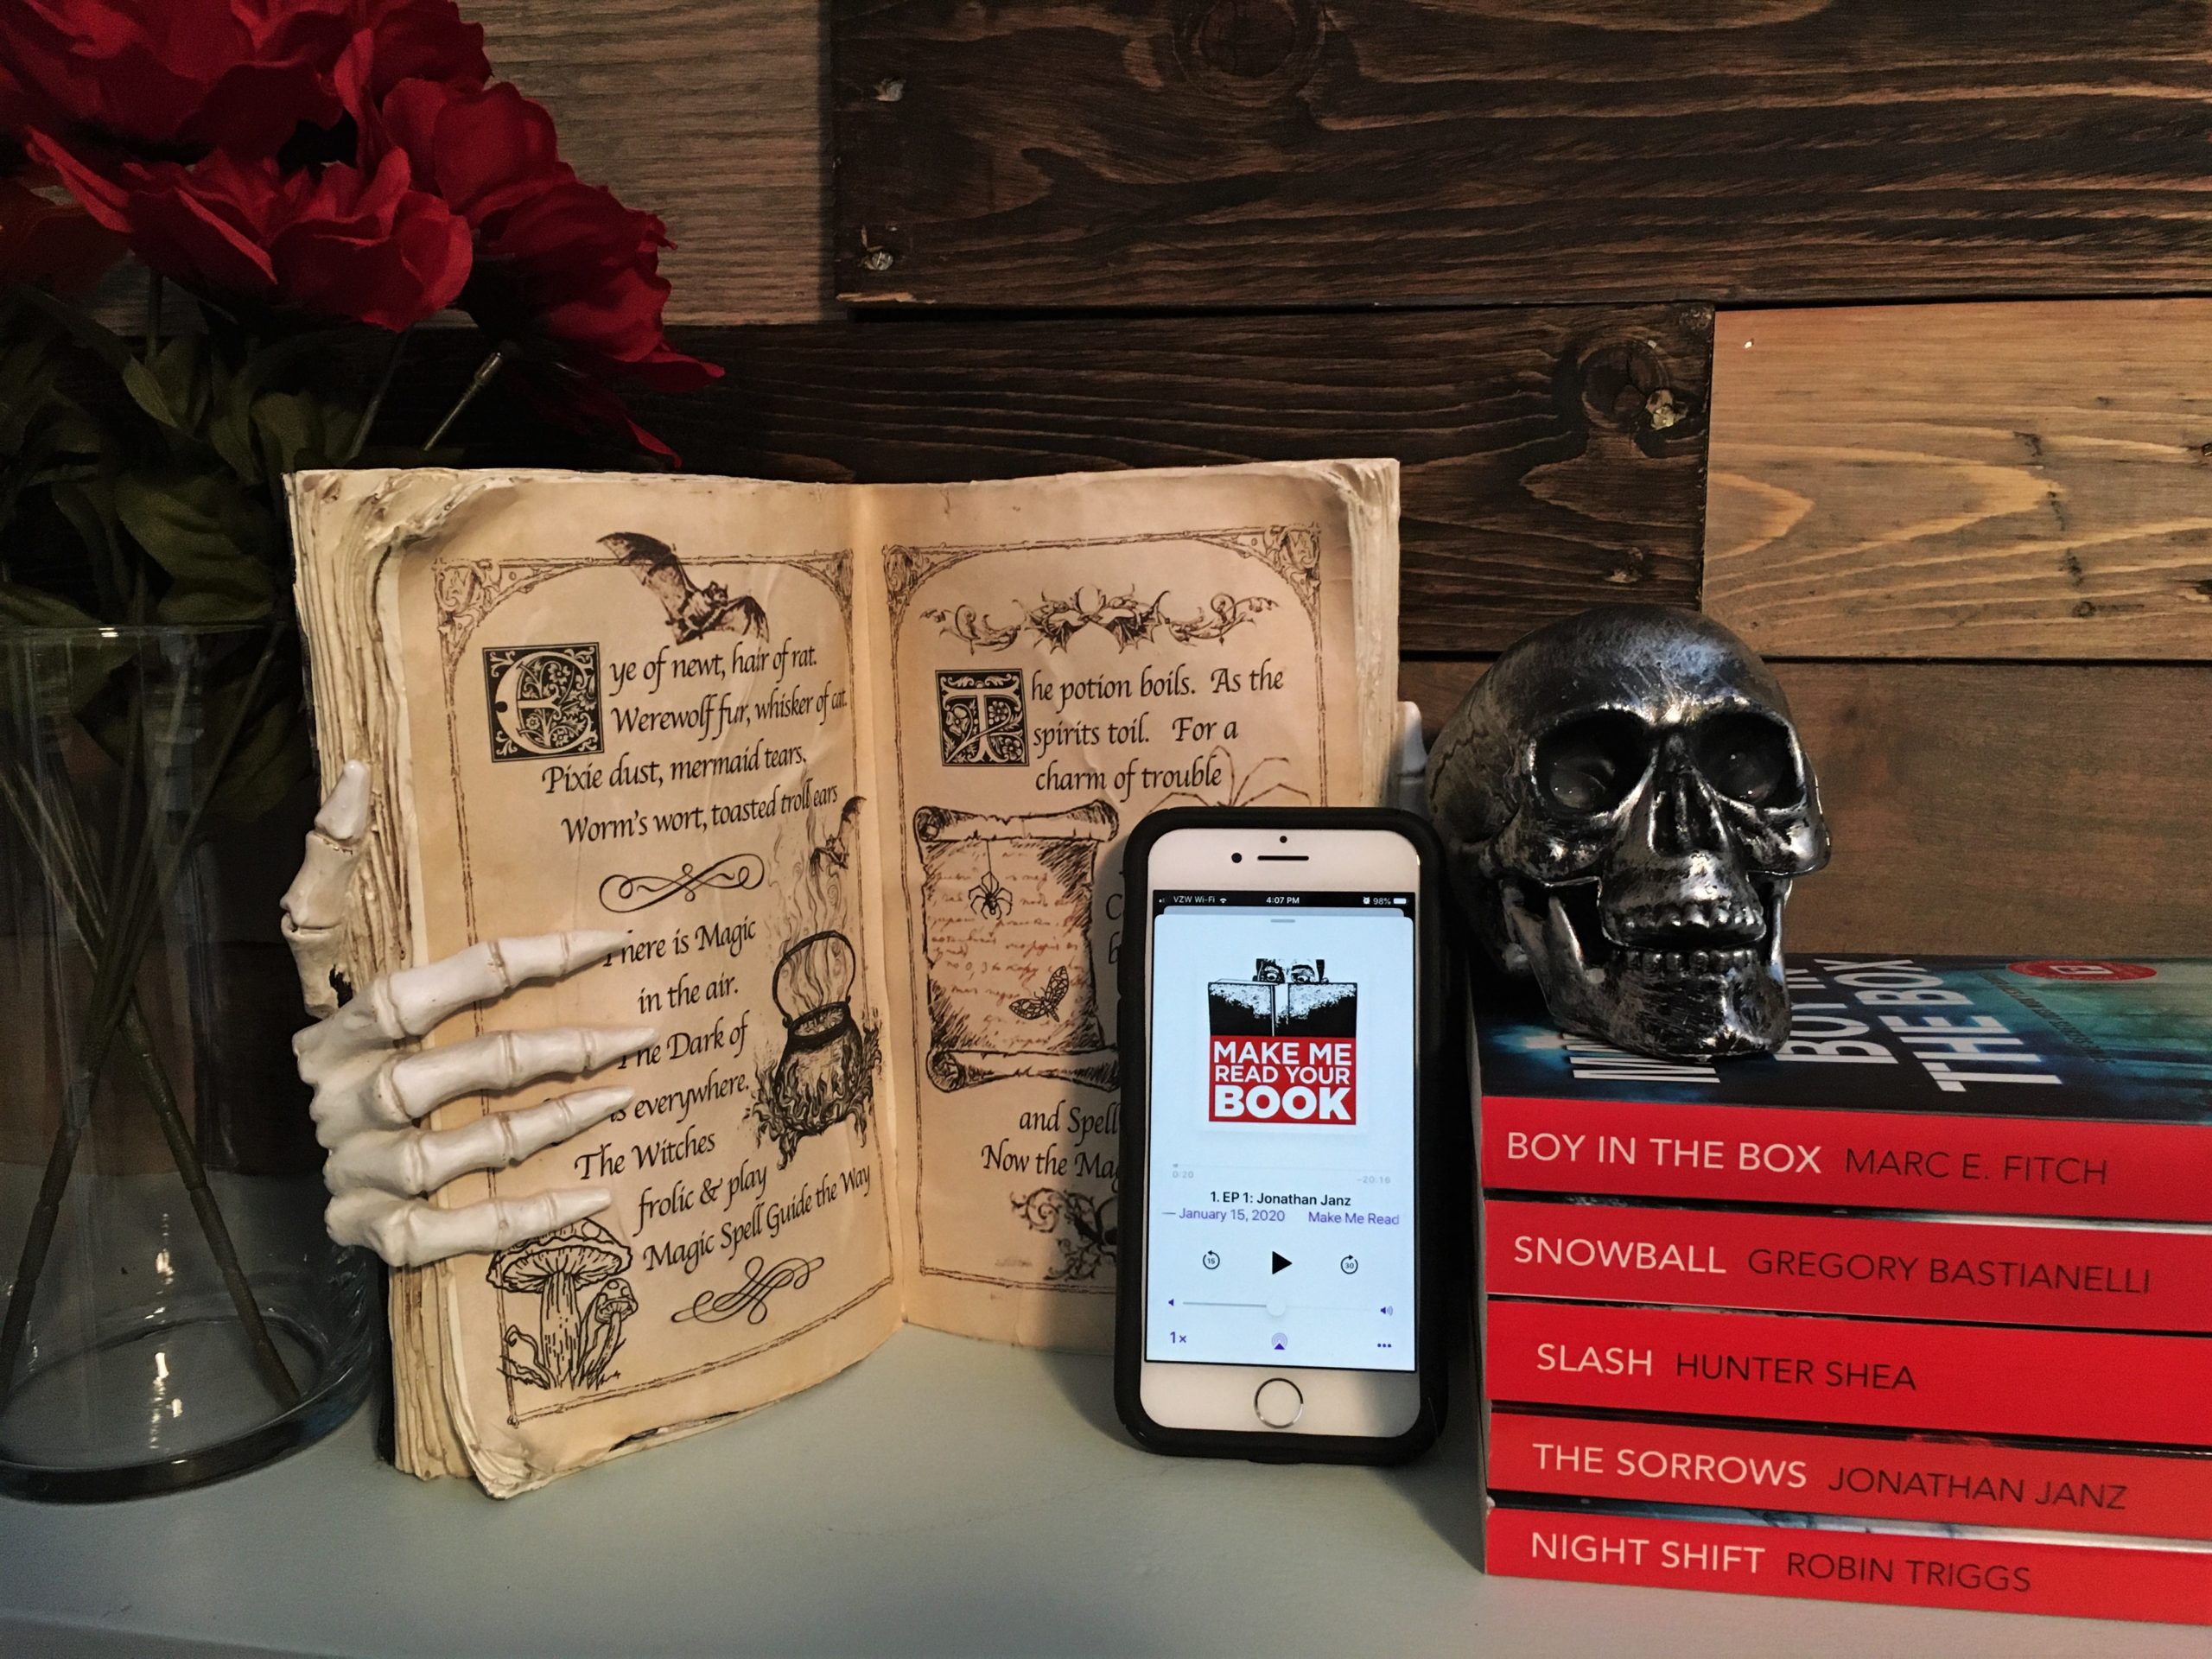 Make Me Read Your Book podcast feature